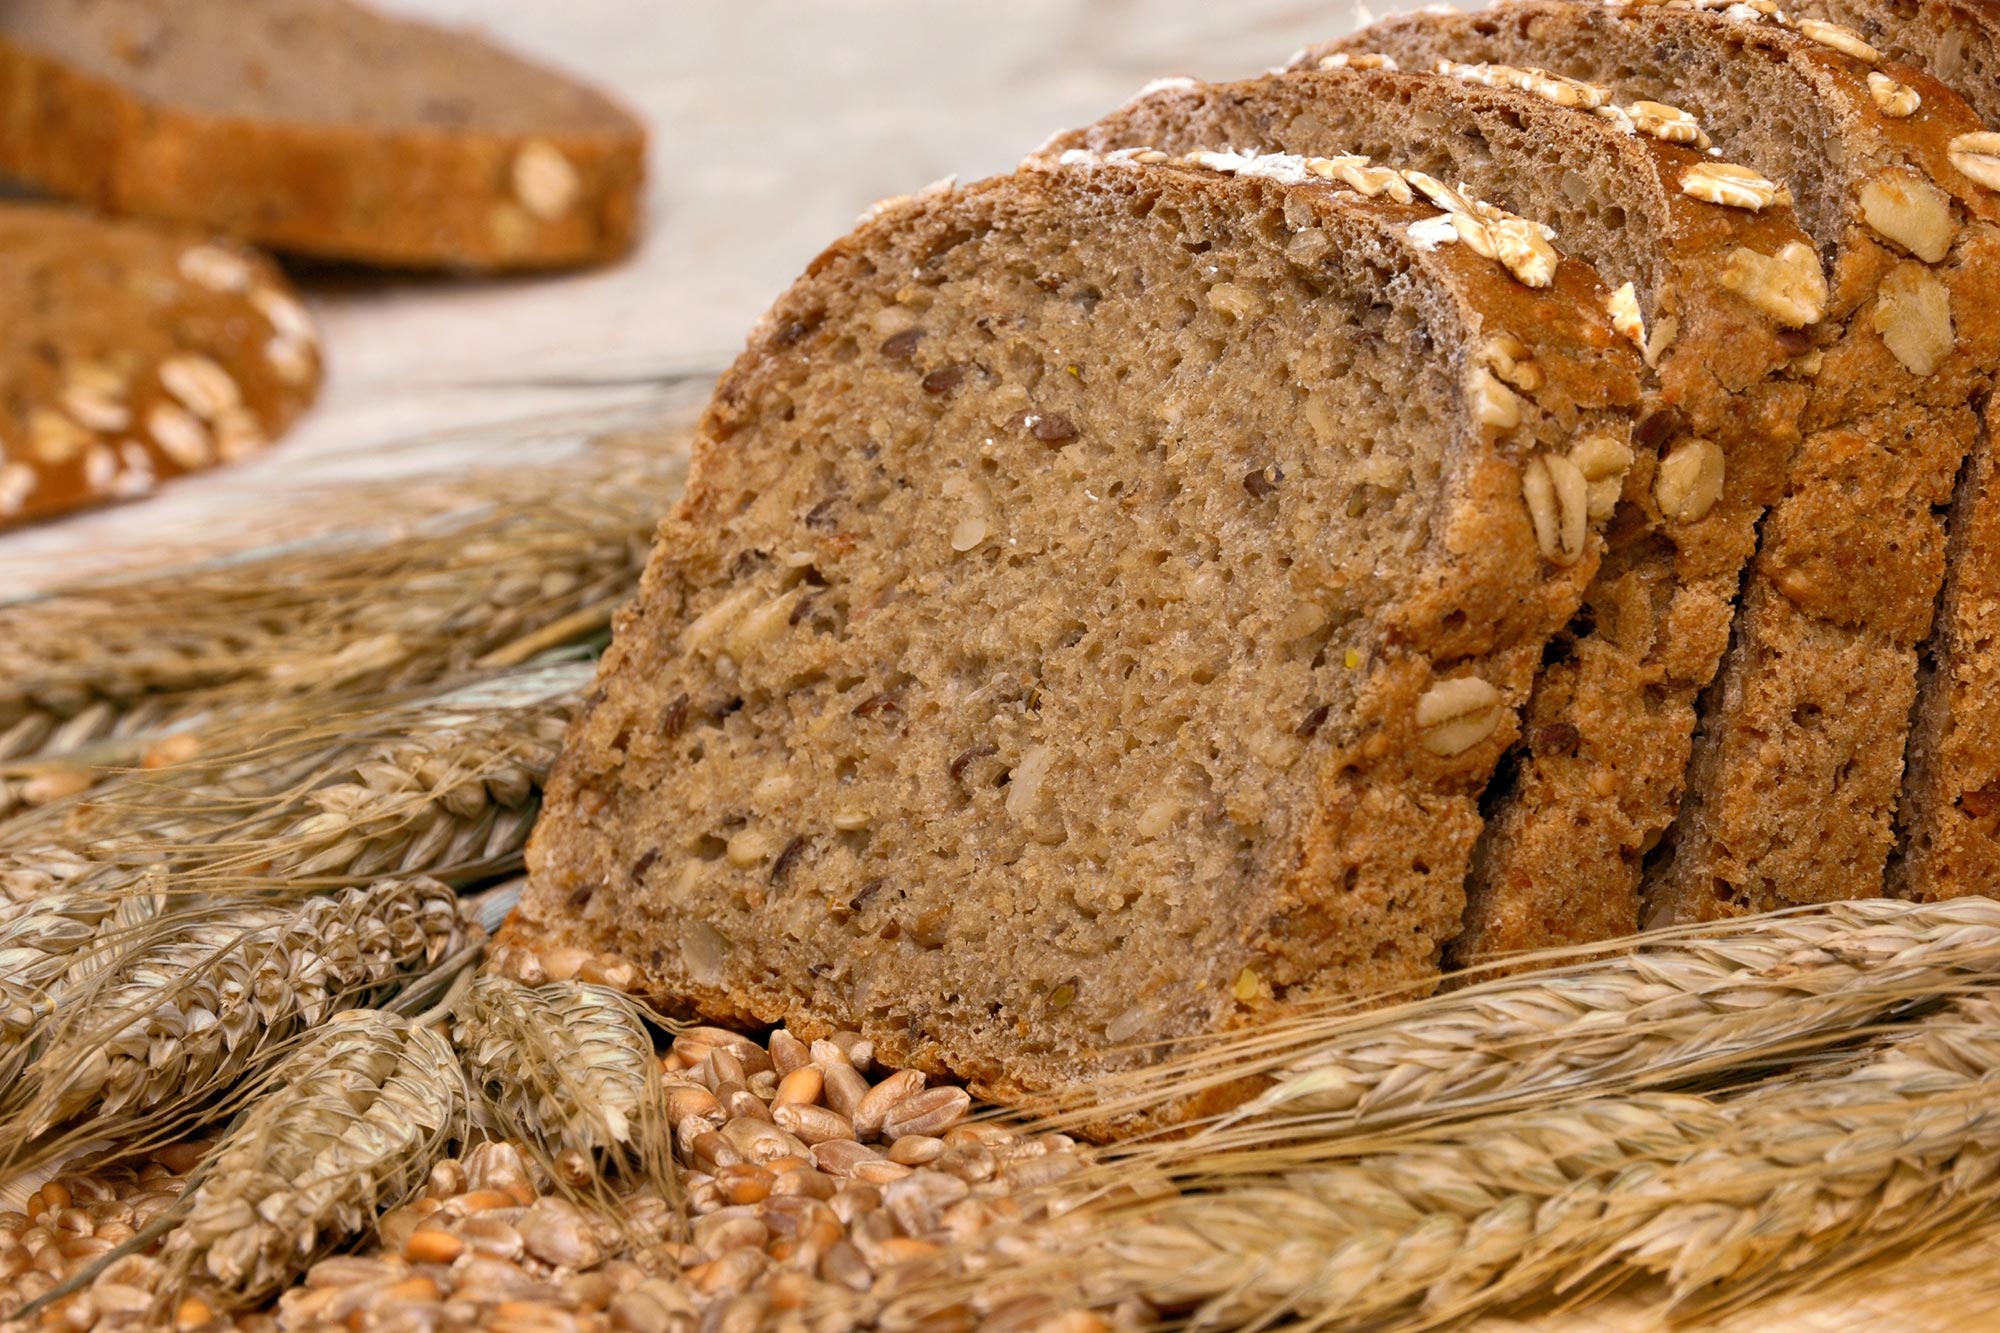 Eating whole grains can be a simple way to protect against heart disease